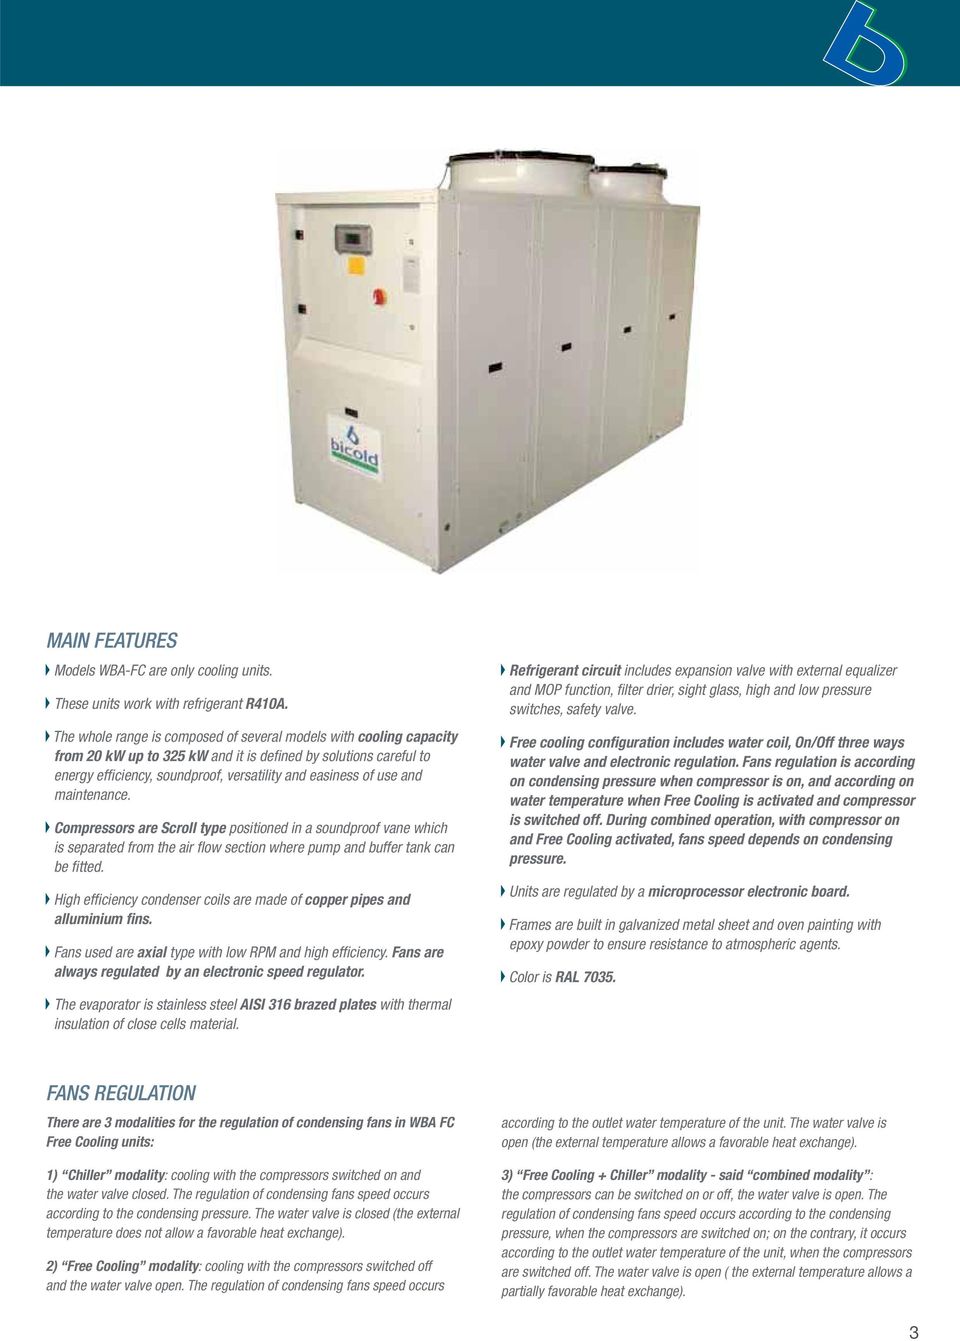 maintenance. Compressors are Scroll type positioned in a soundproof vane which is separated from the air flow section where pump and buffer tank can be fitted.